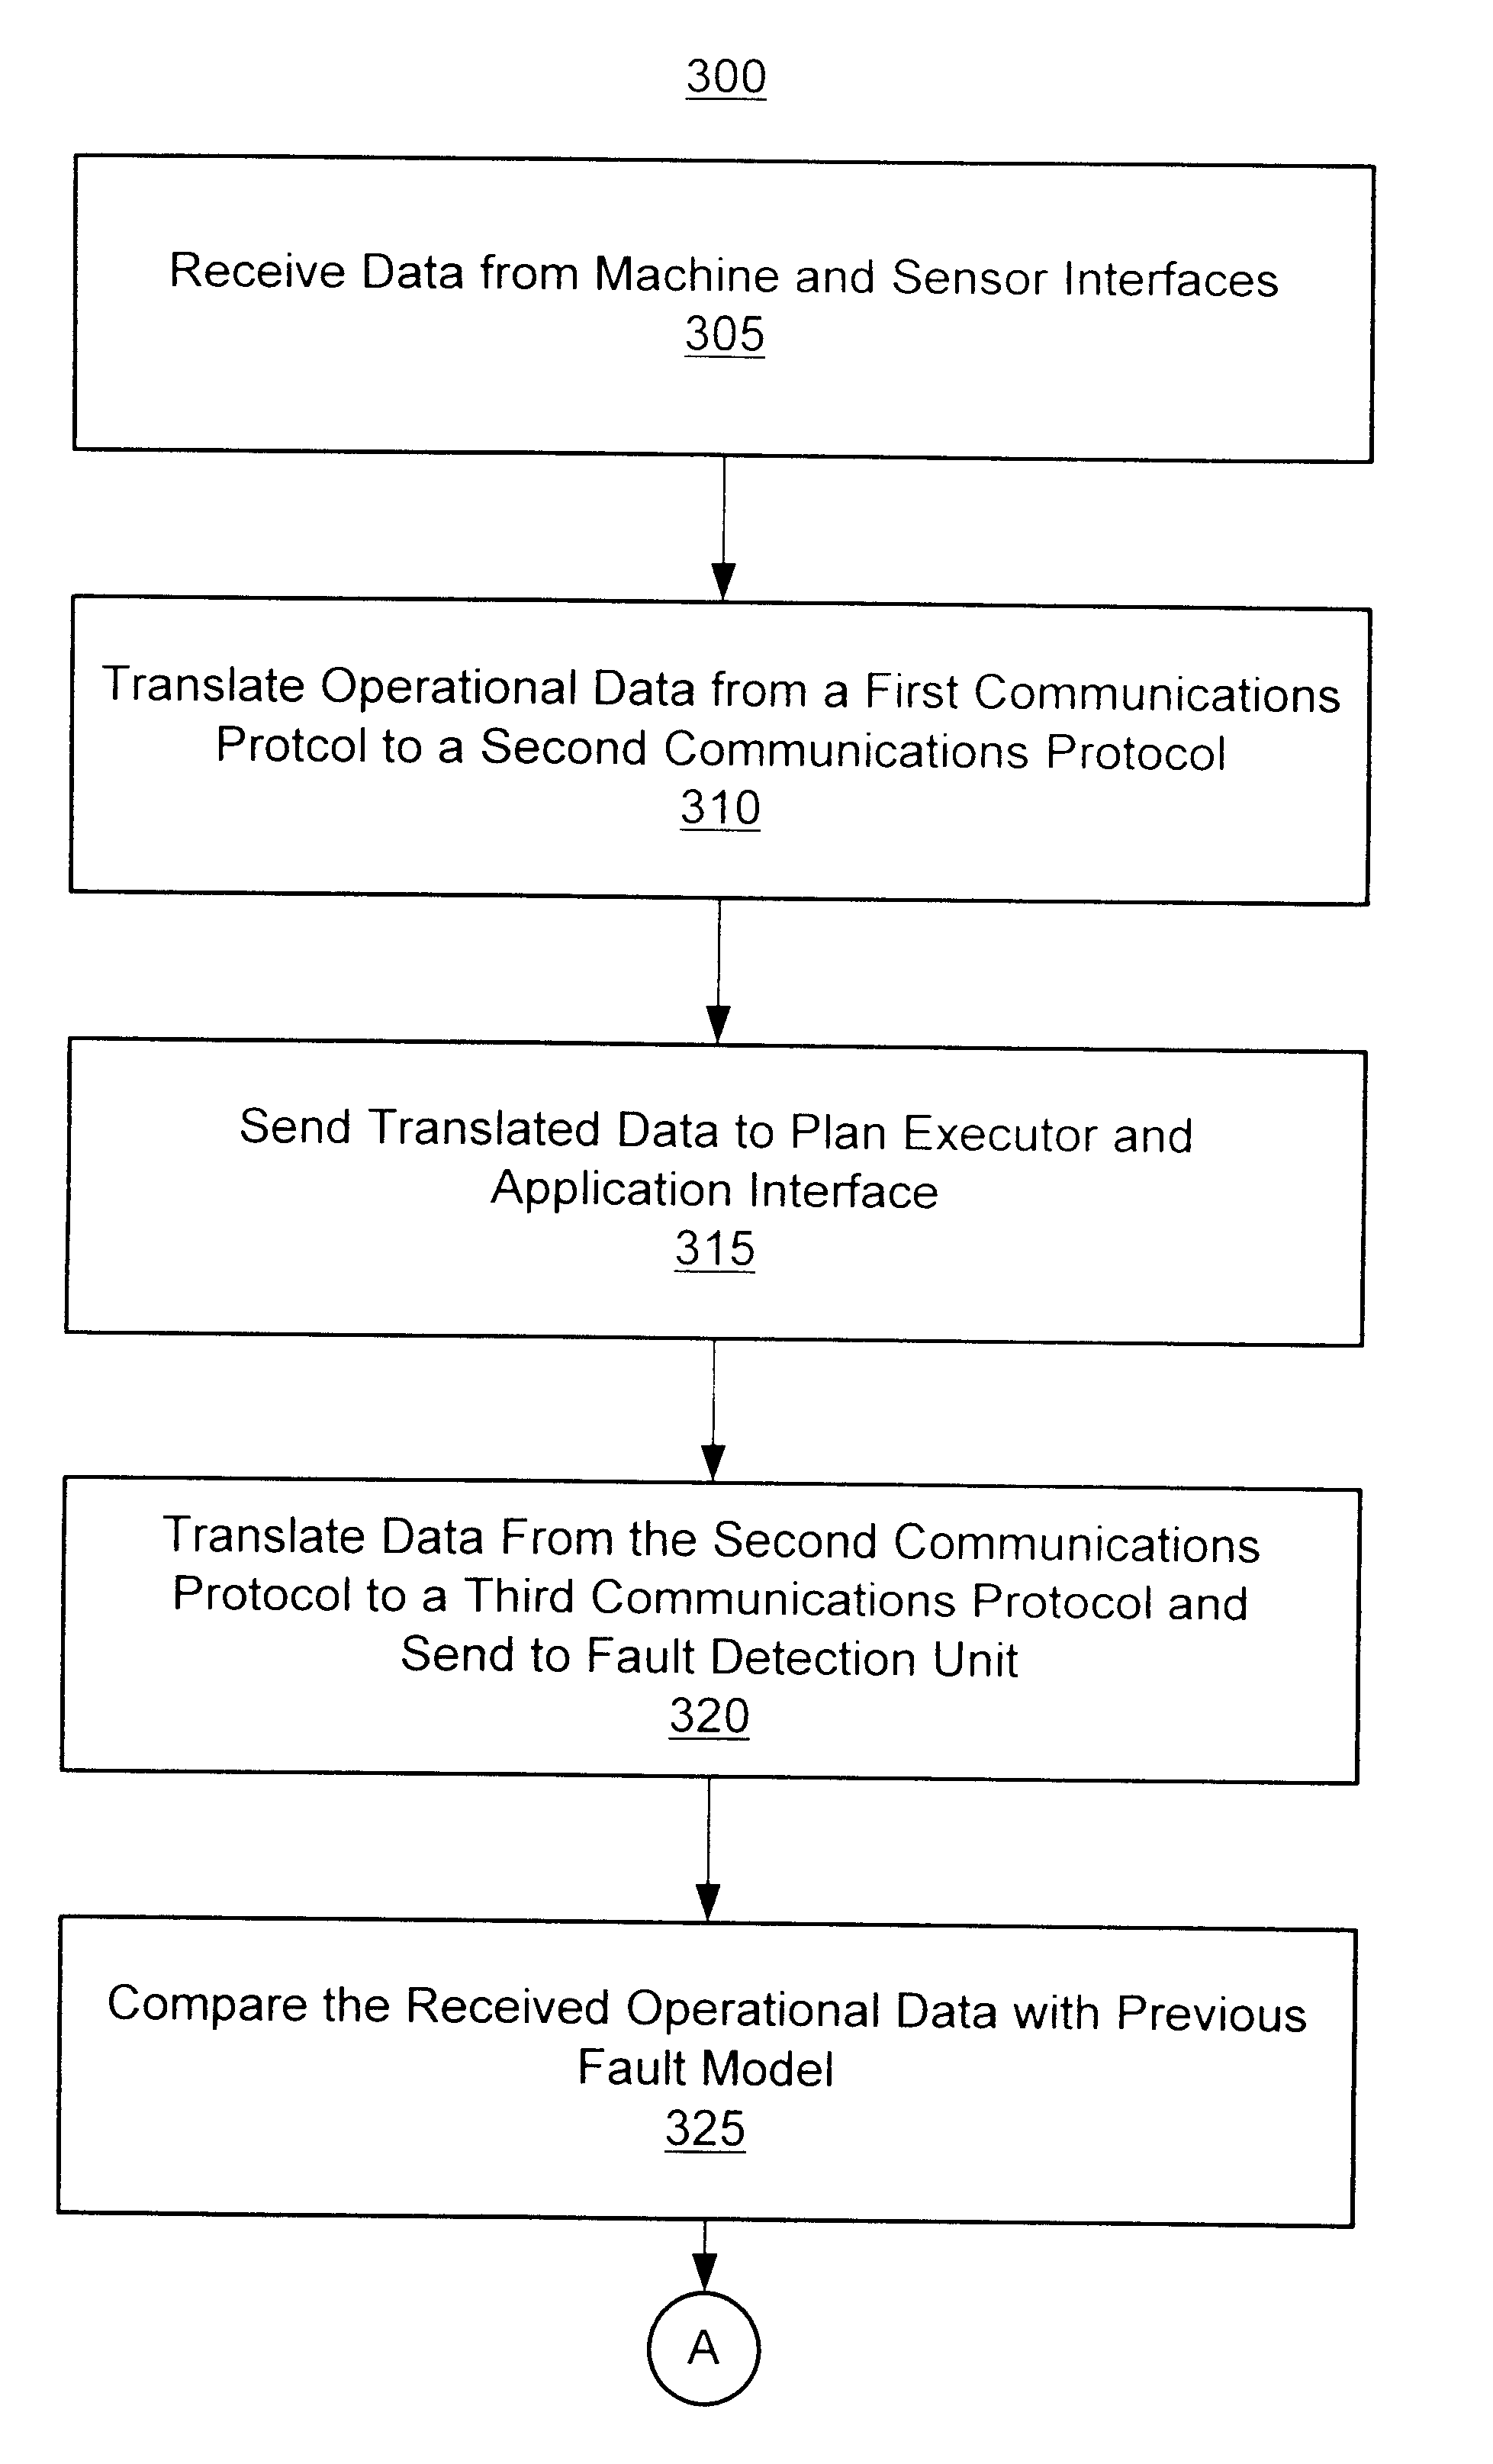 Method and apparatus for integrating near real-time fault detection in an APC framework